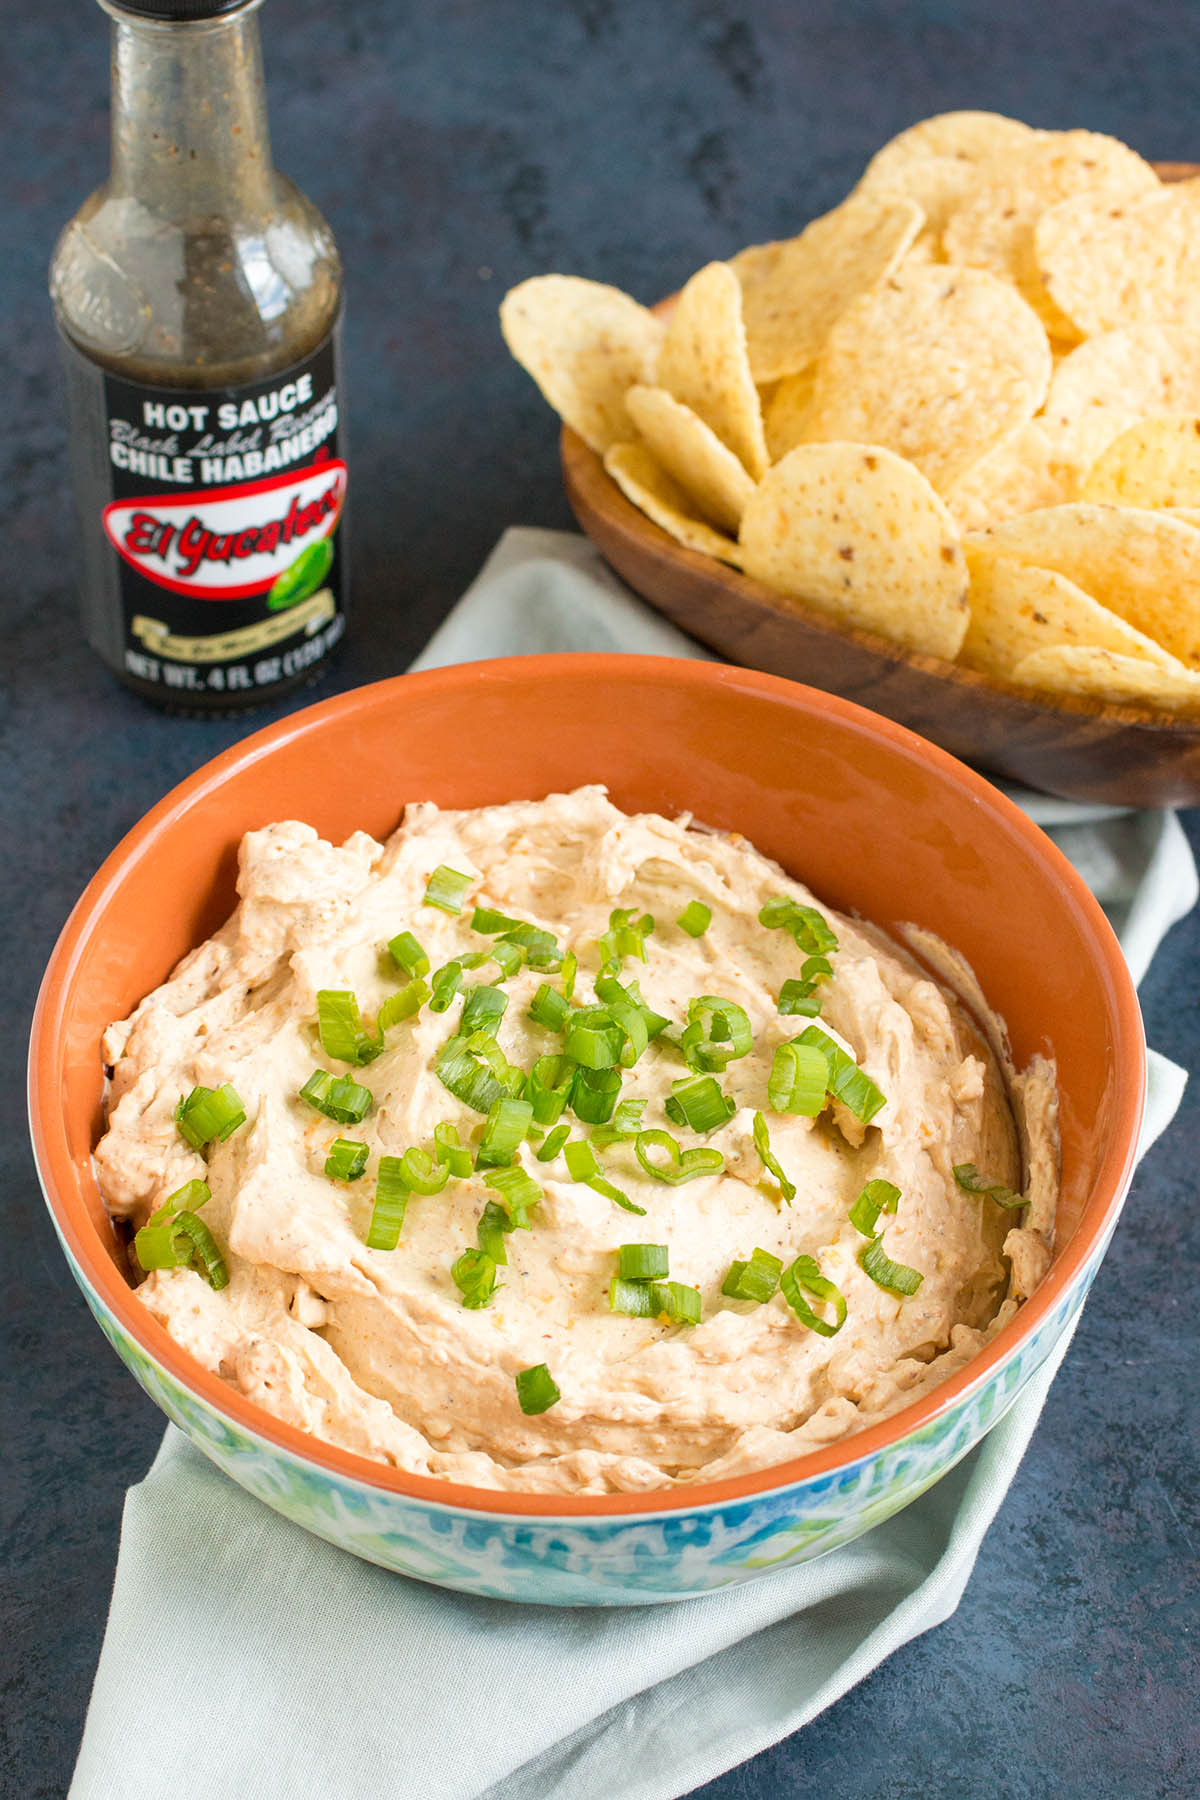 Spicy Beer Dip is ready and served.